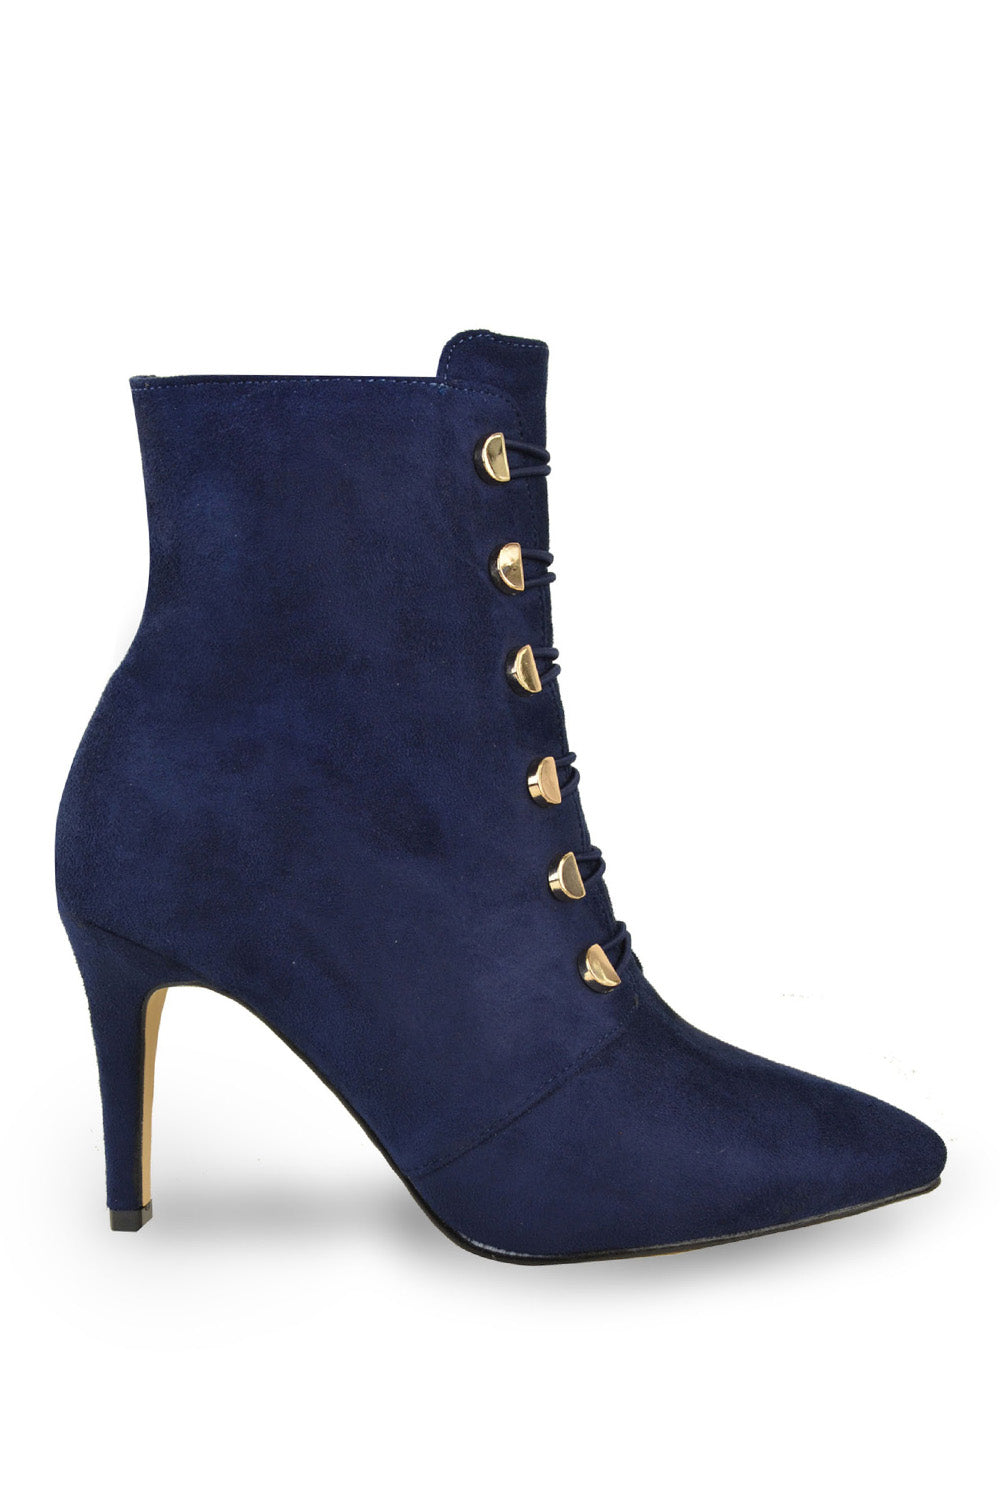 BLYTHE POINTED TOE MID HEEL ANKLE BOOTS WITH GOLD BUTTONS IN NAVY BLUE FAUX SUEDE